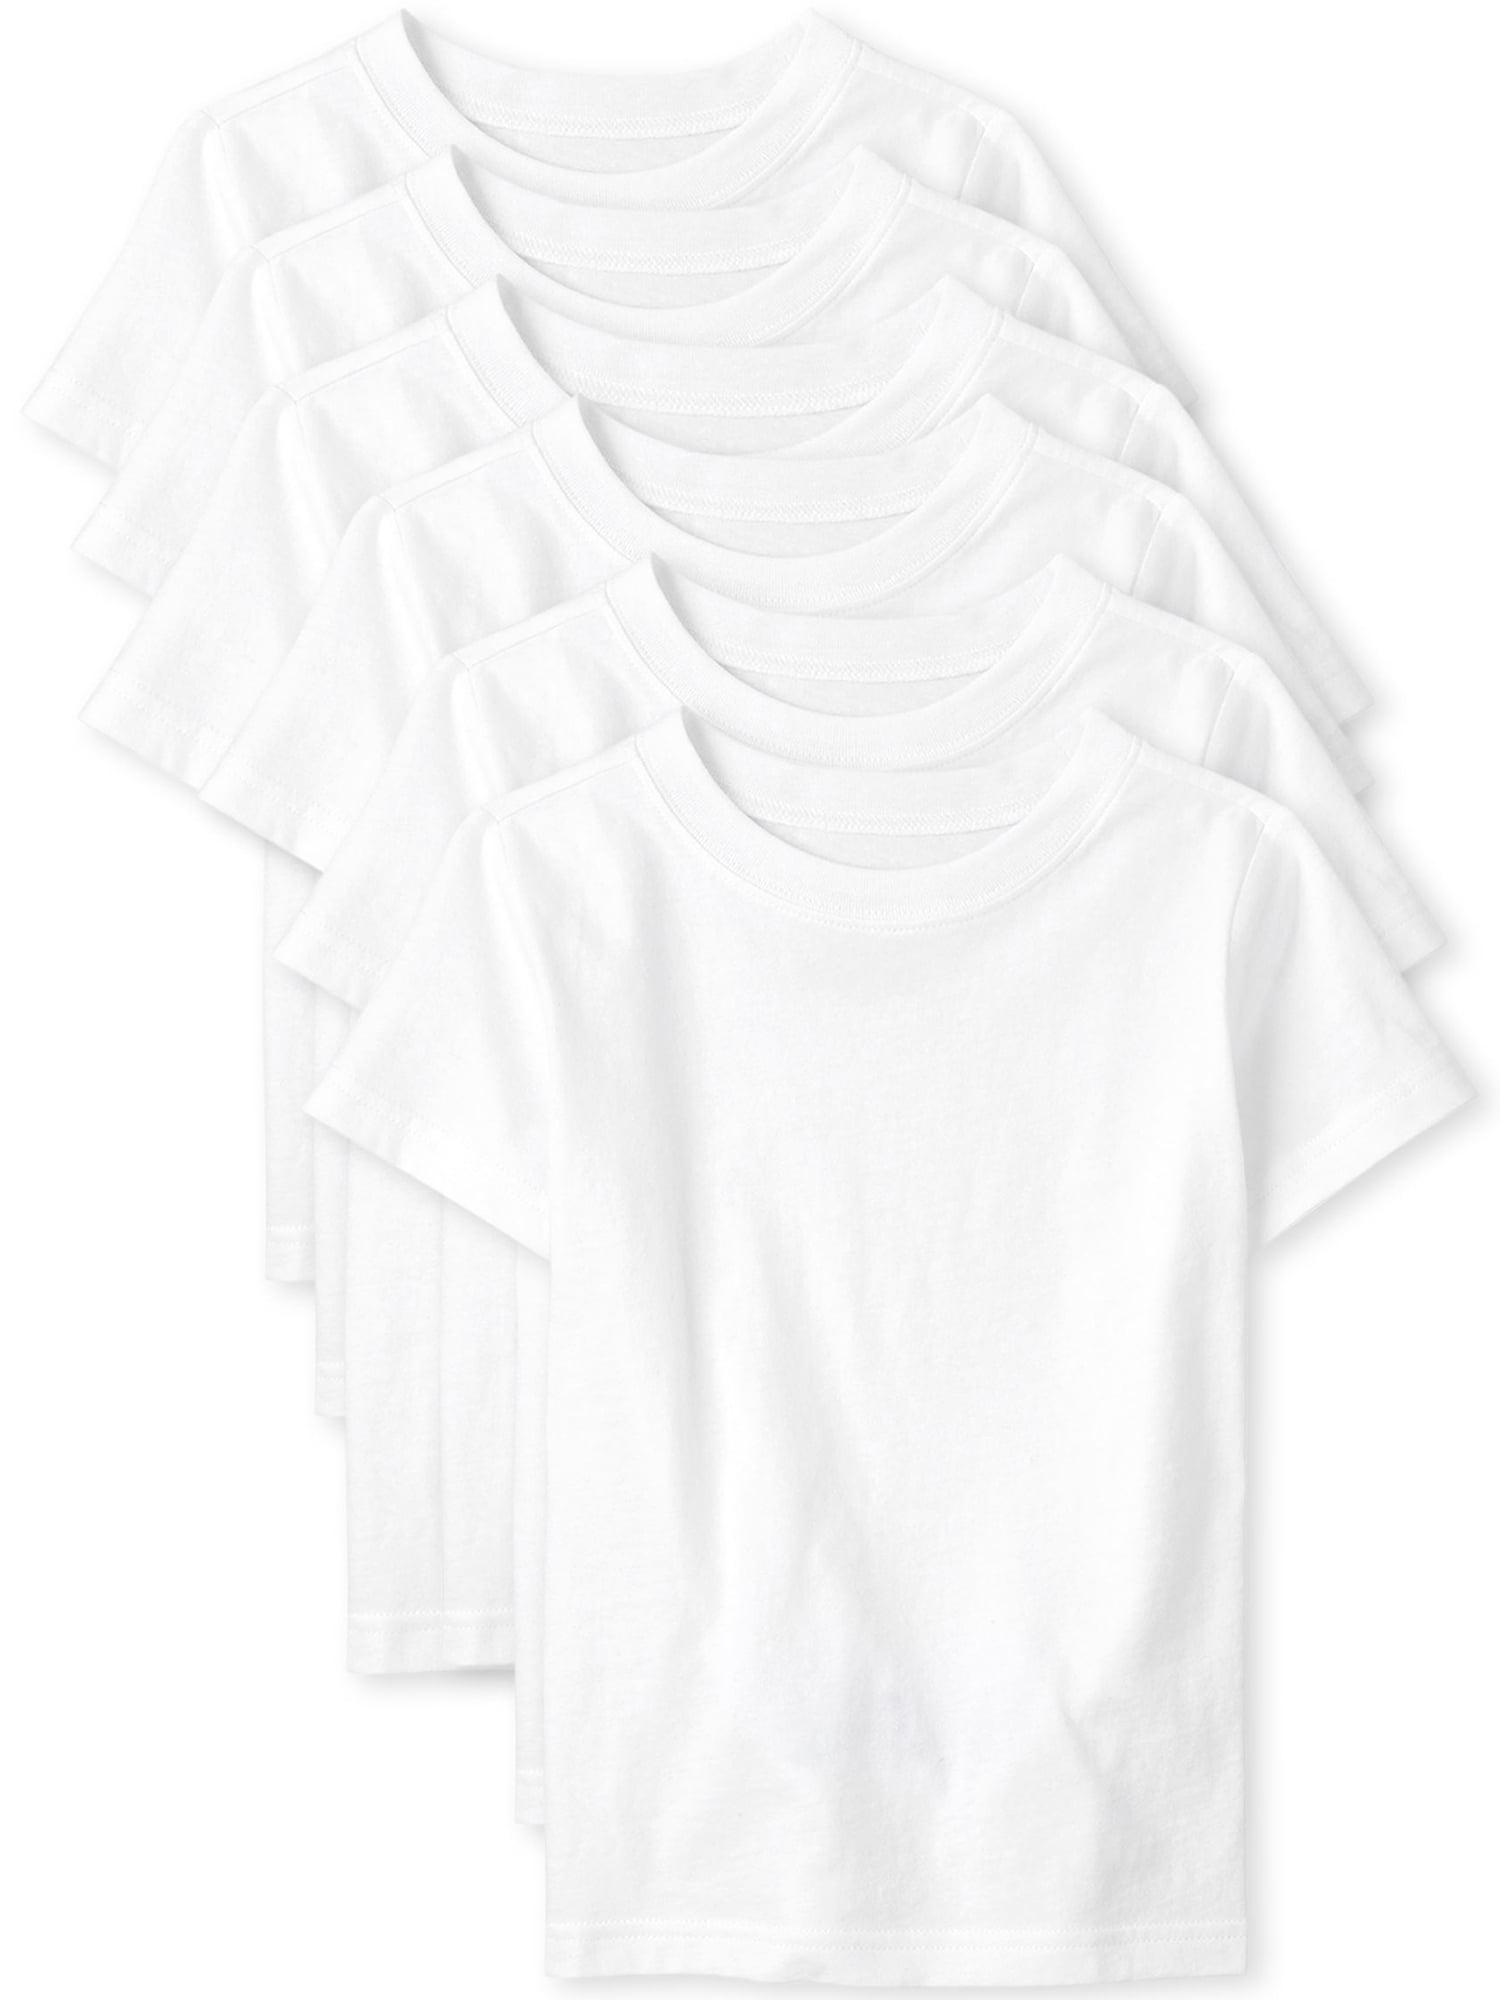 6-Pack The Children's Place Boys Short-Sleeve T-Shirts (White, Sizes XS-XXL) $15 + Free S&H w/ Walmart+ or $35+